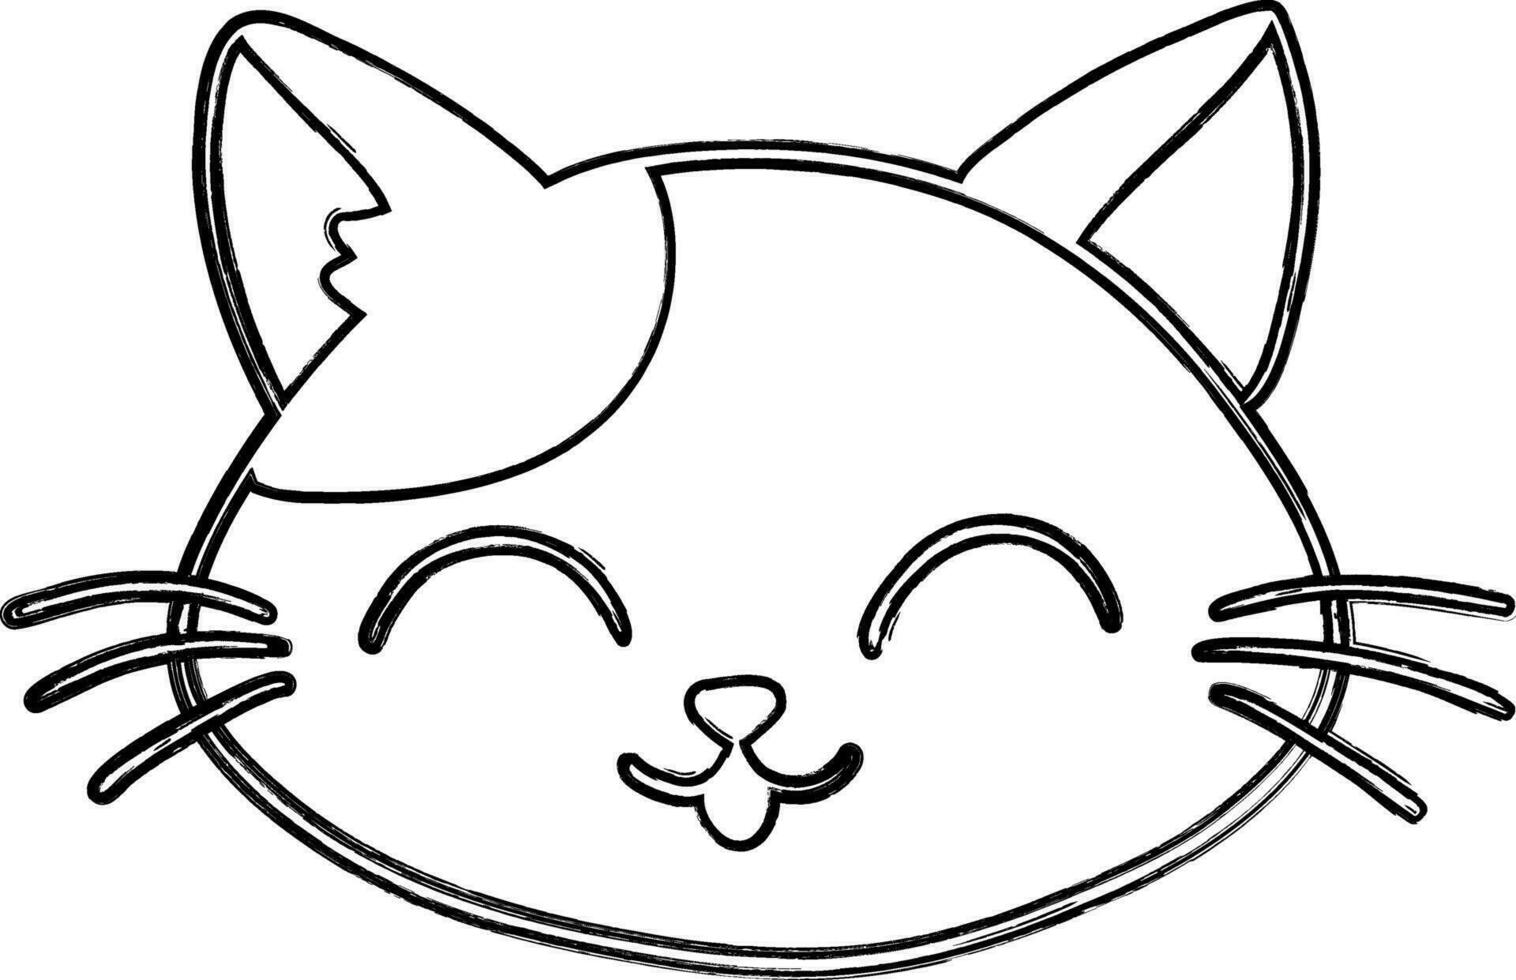 Cat muzzle drawing decoration and design. vector